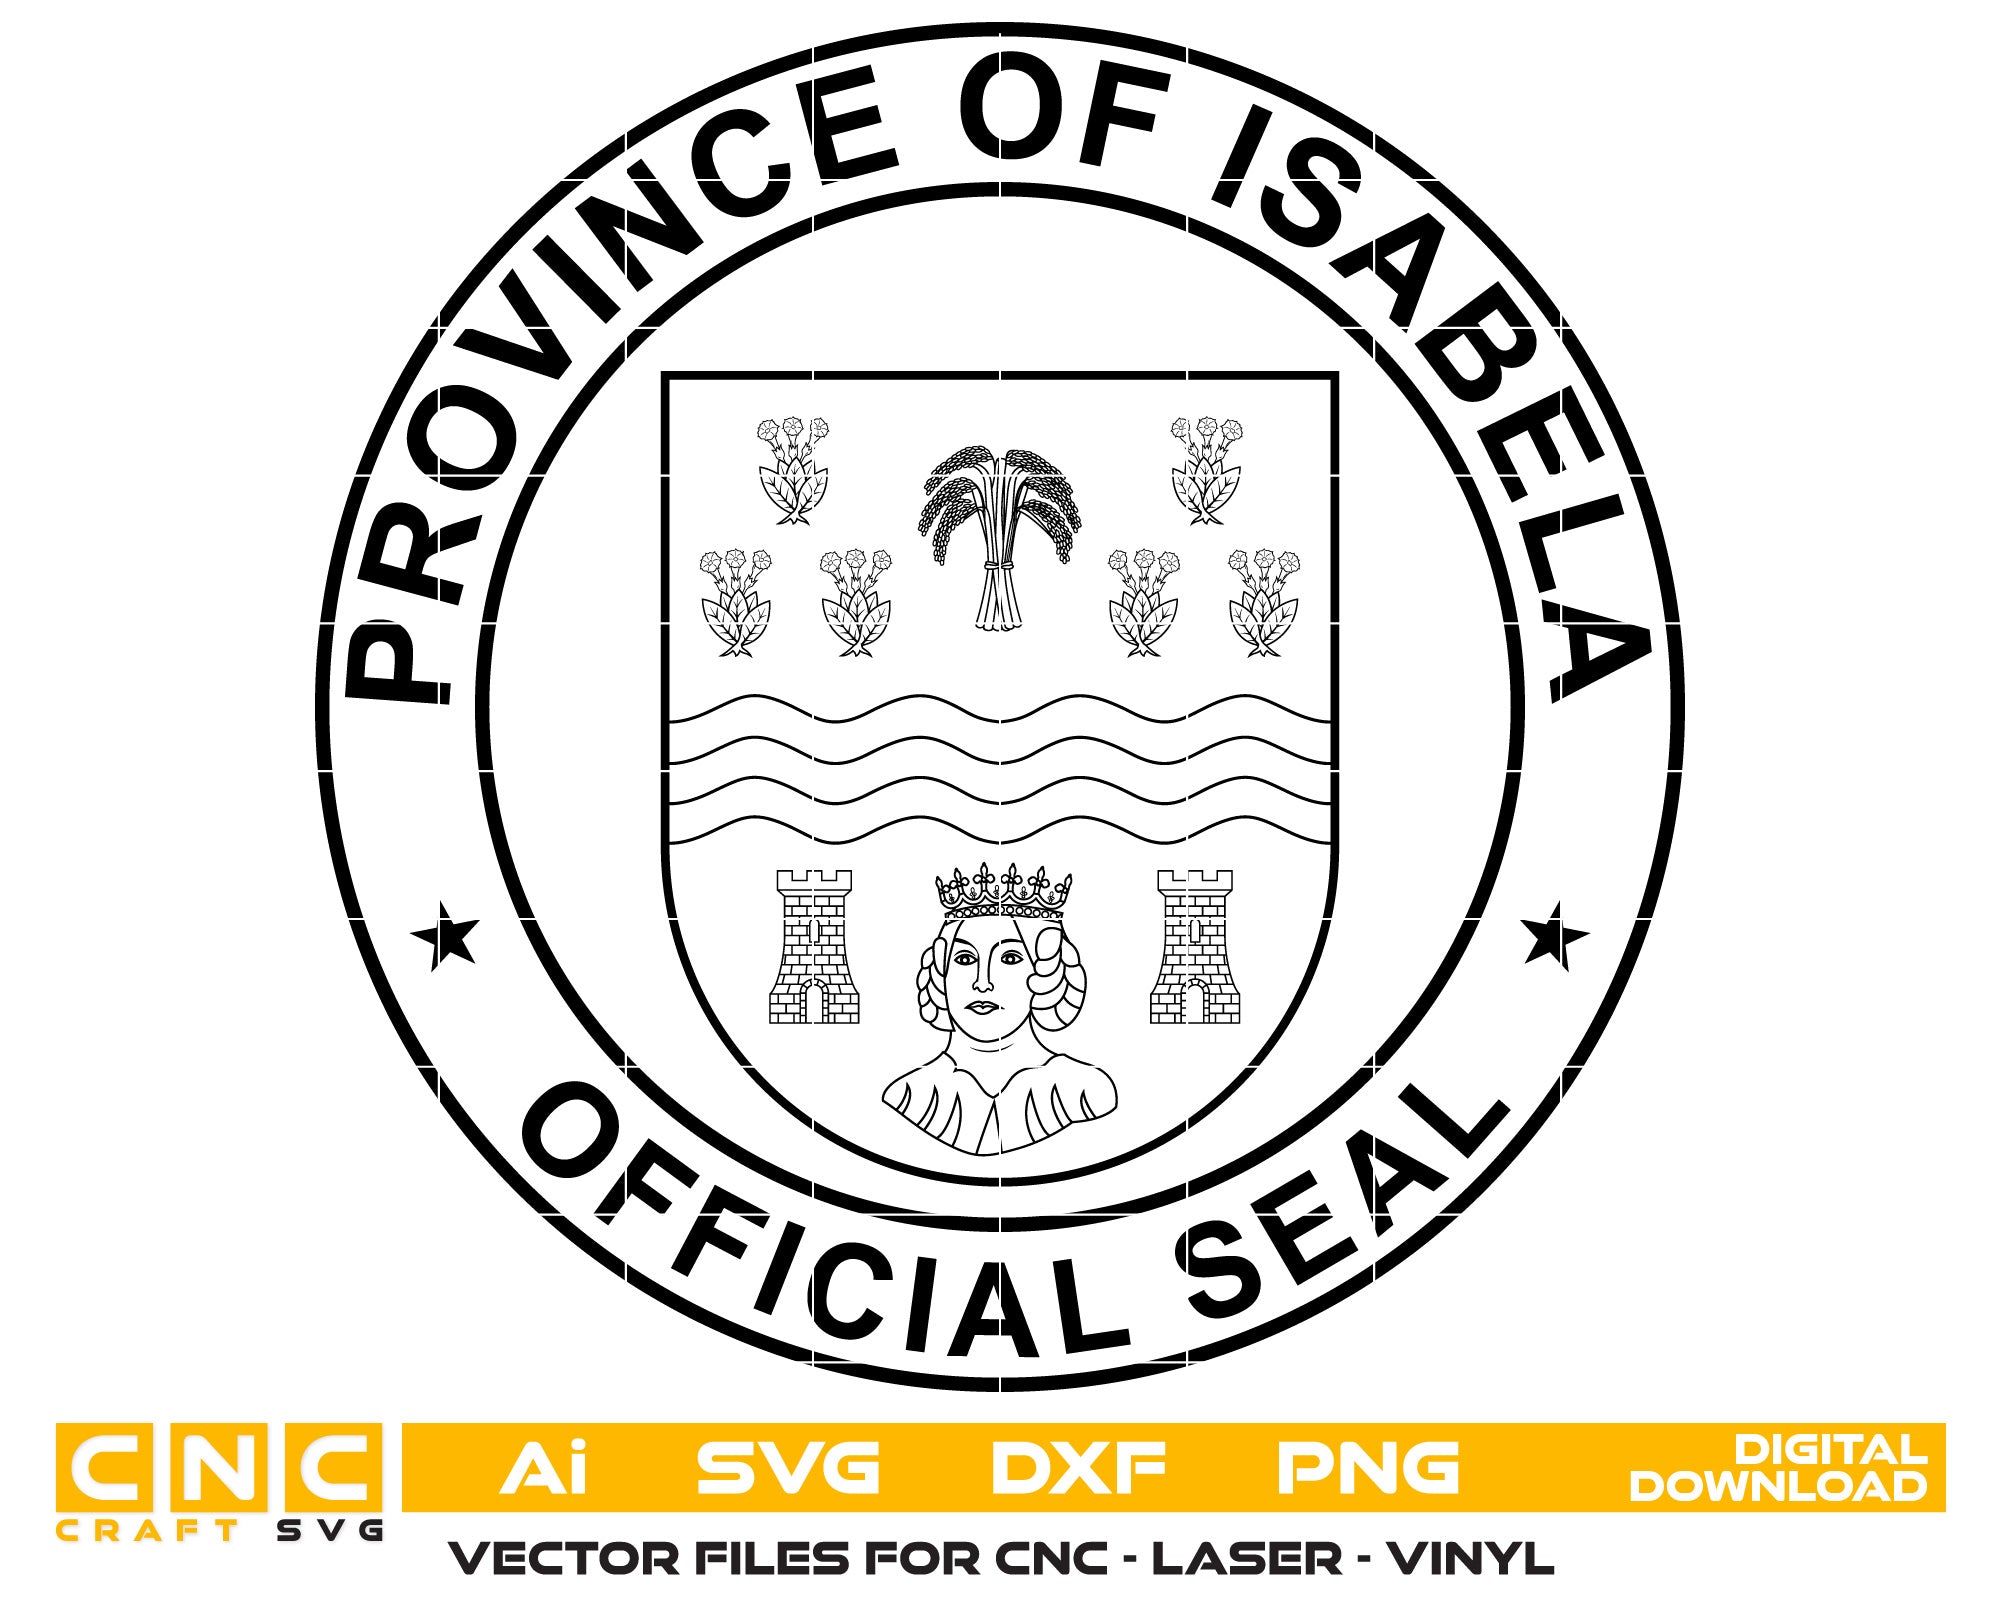 Province of Isabela Official Seal Vector Art, Ai,SVG, DXF, PNG, Digital Files